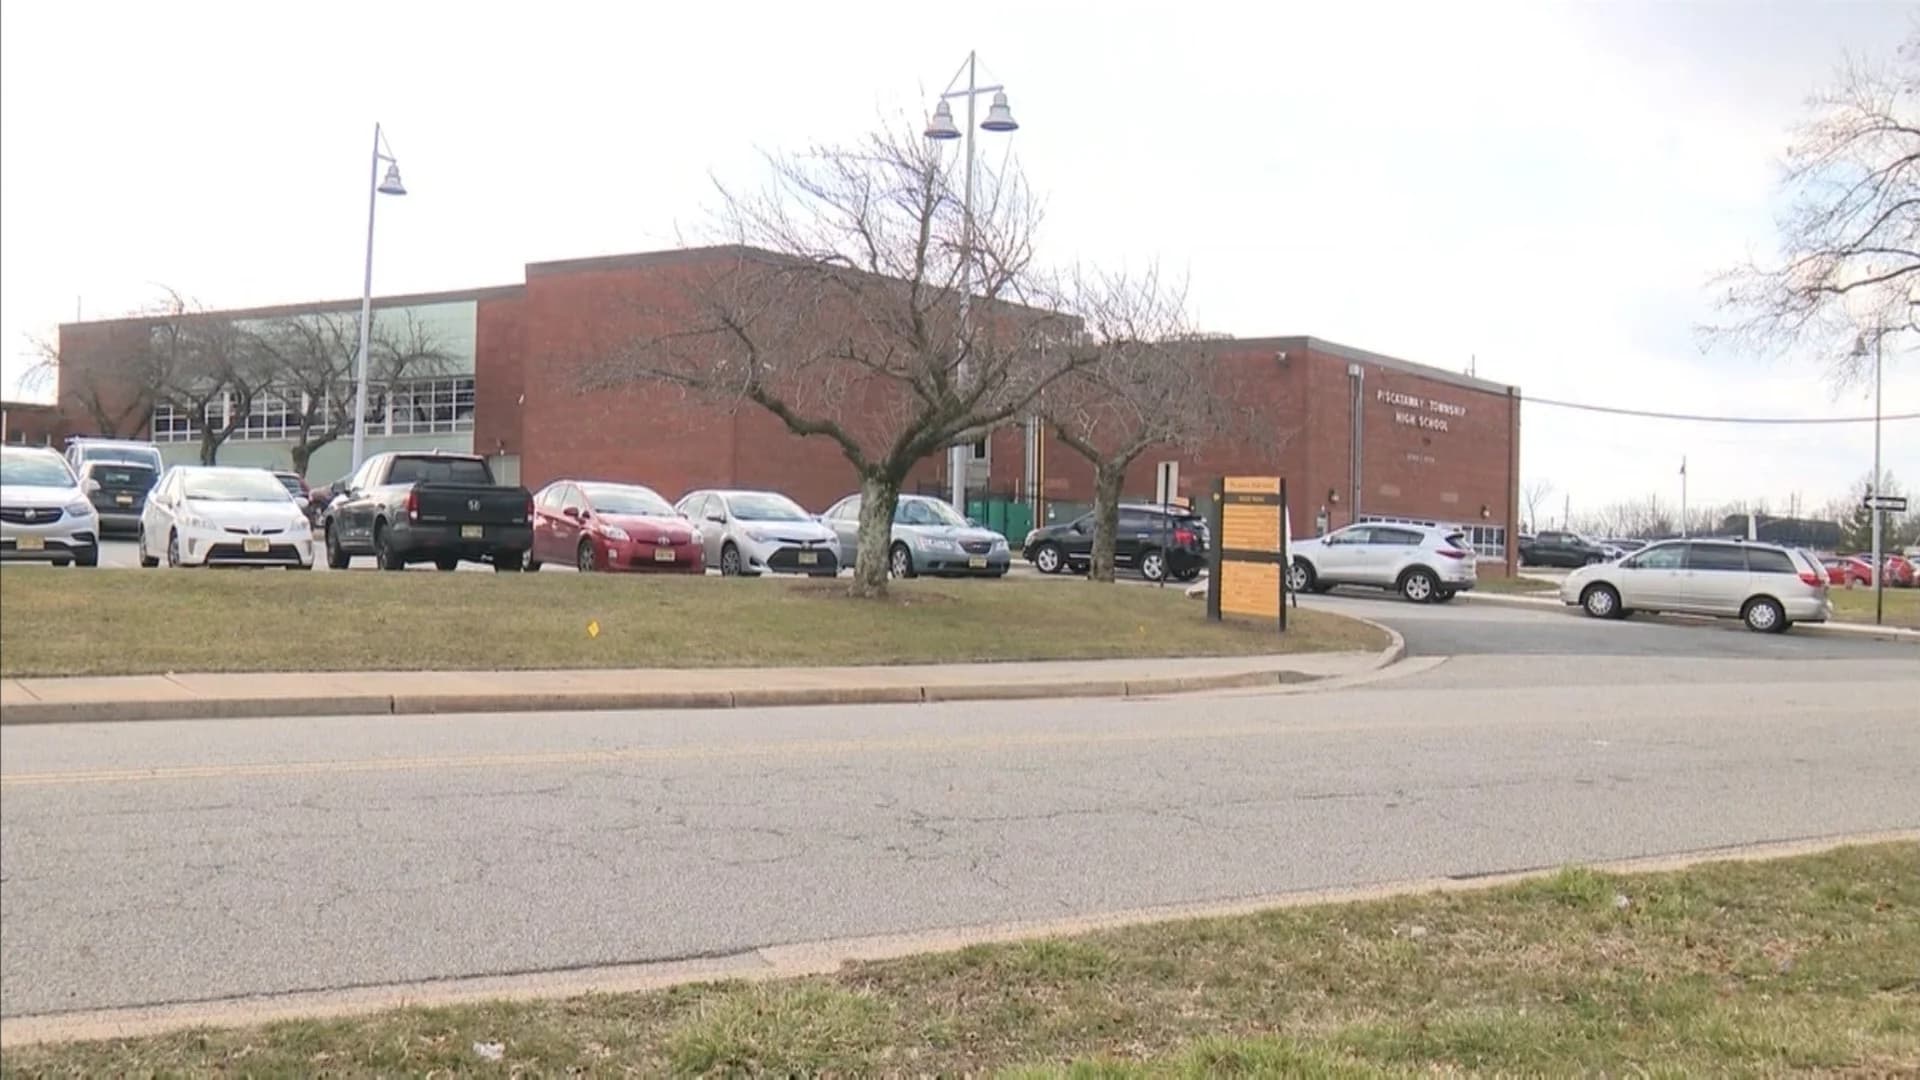 Police: Student’s threat to teacher leads to school lockdown in Piscataway